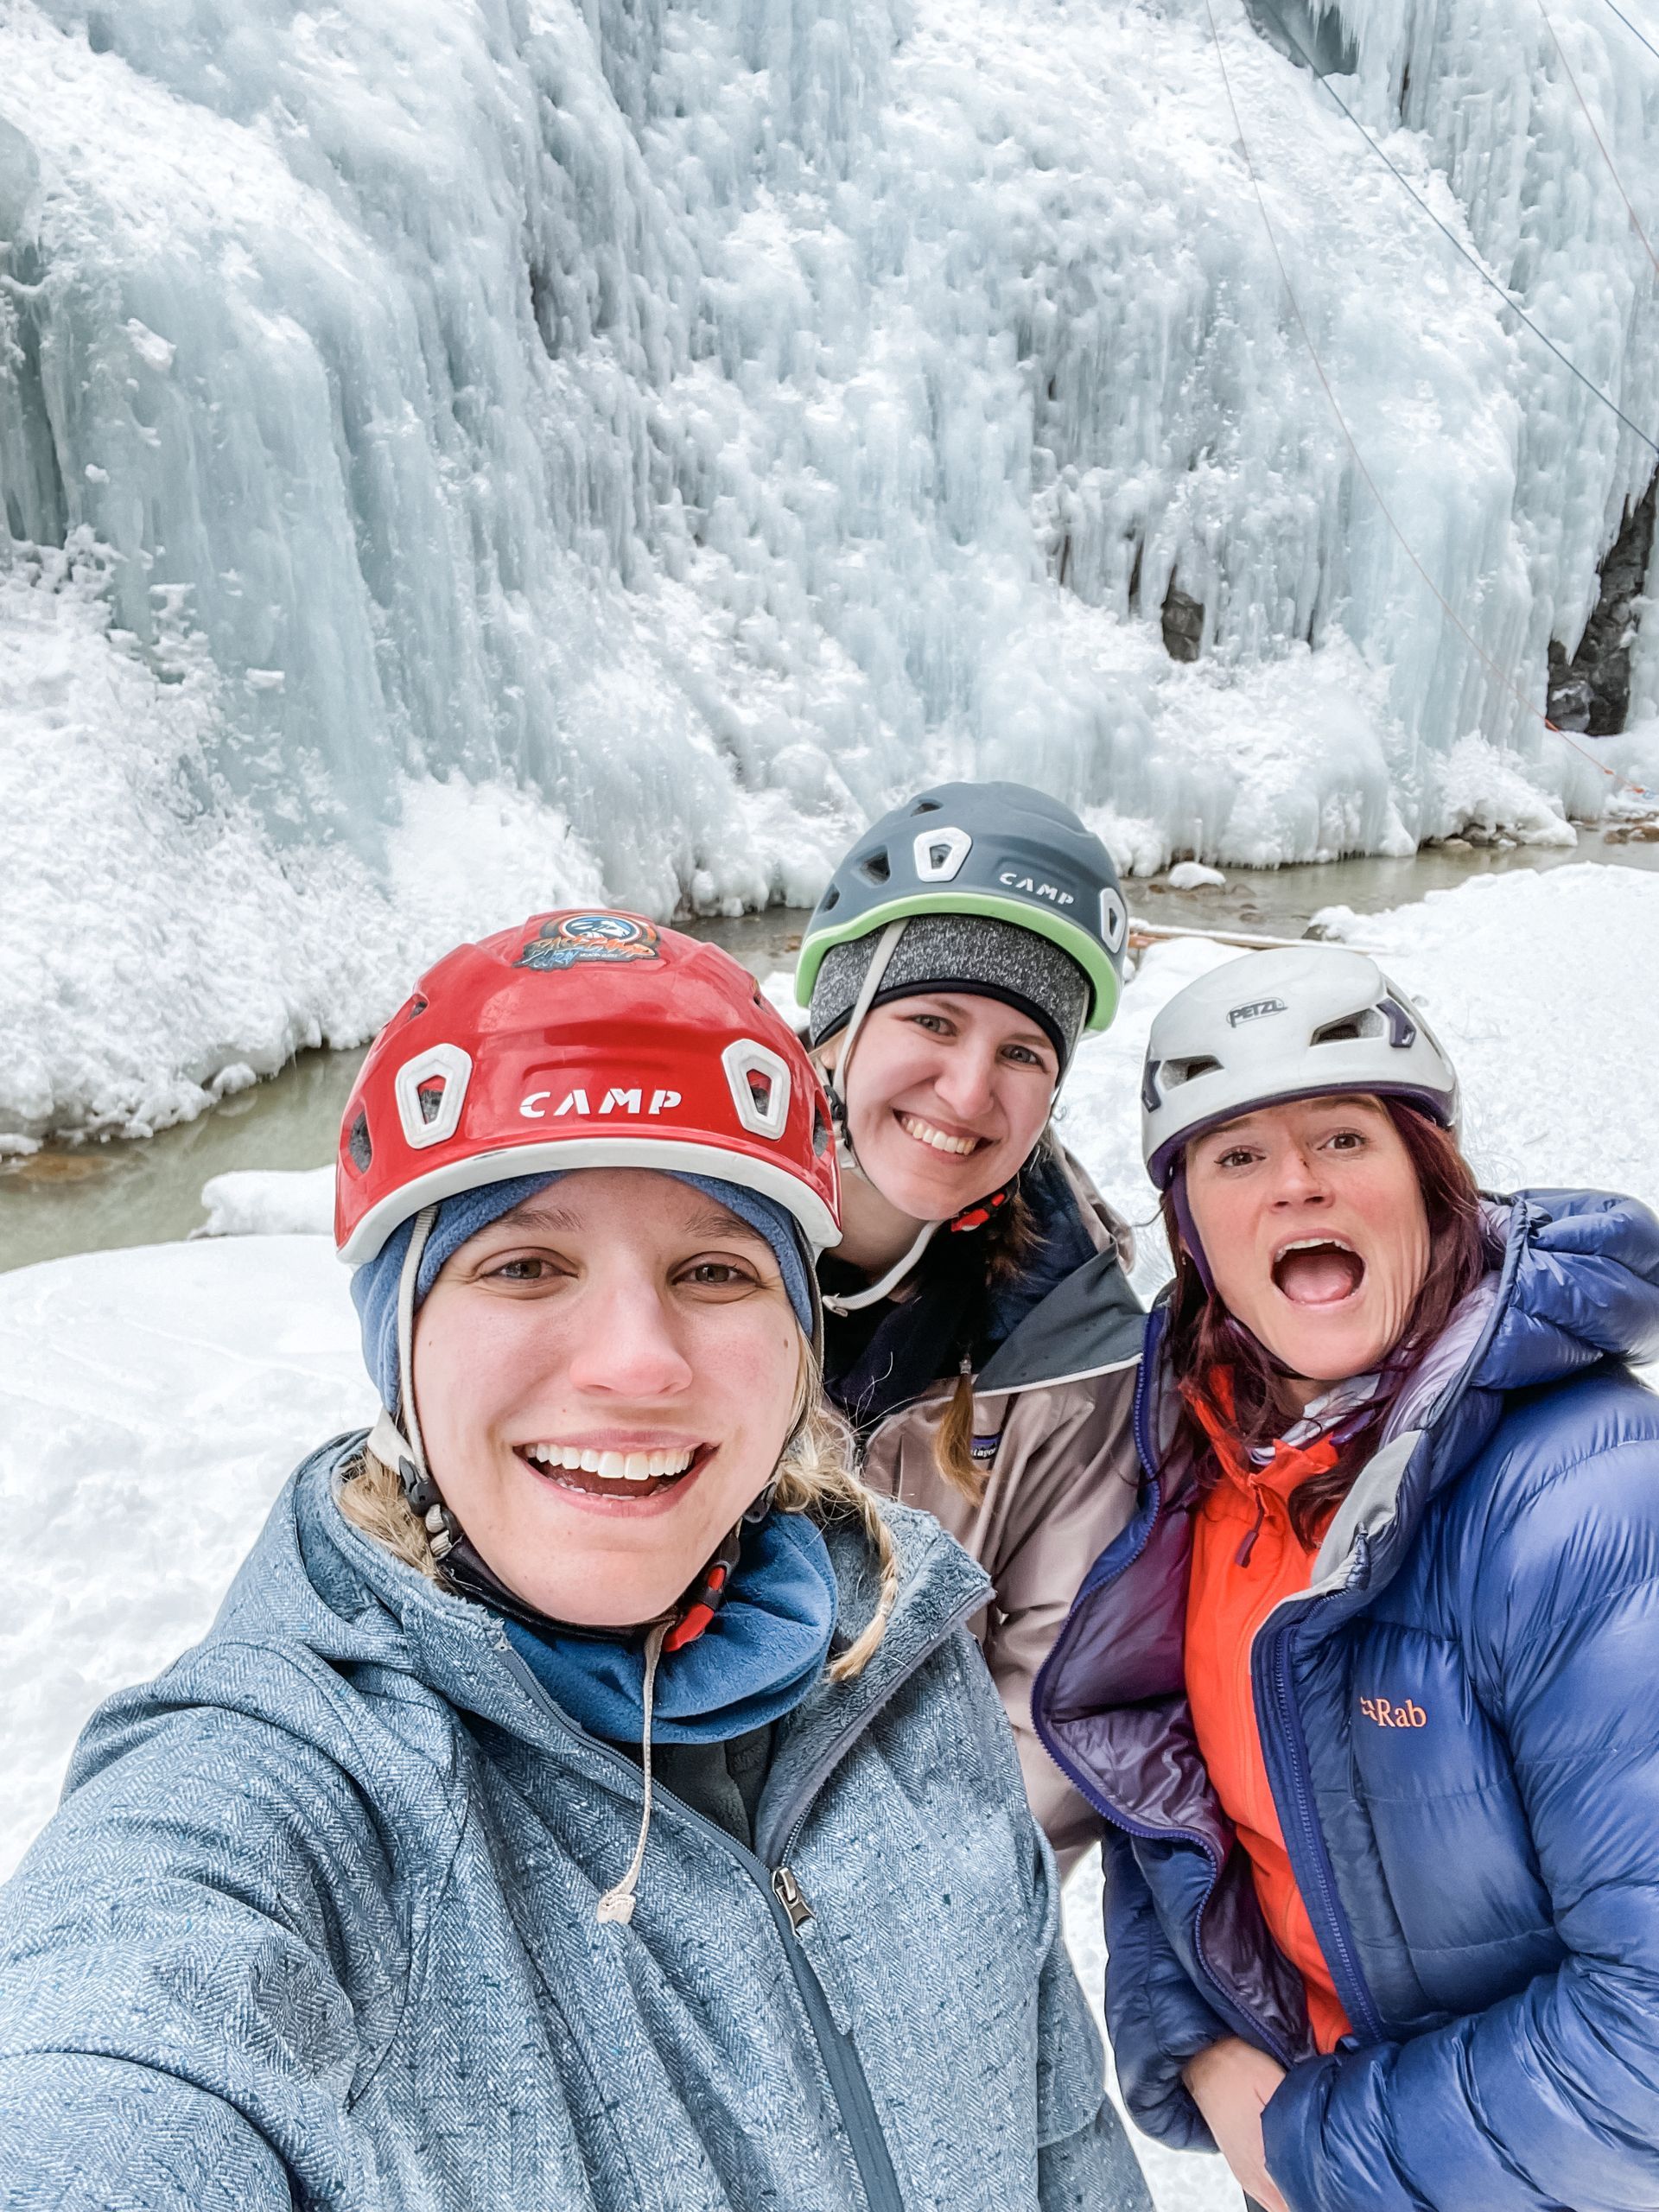 Ice climbers posing for a selfie in front of an ice climbing wall